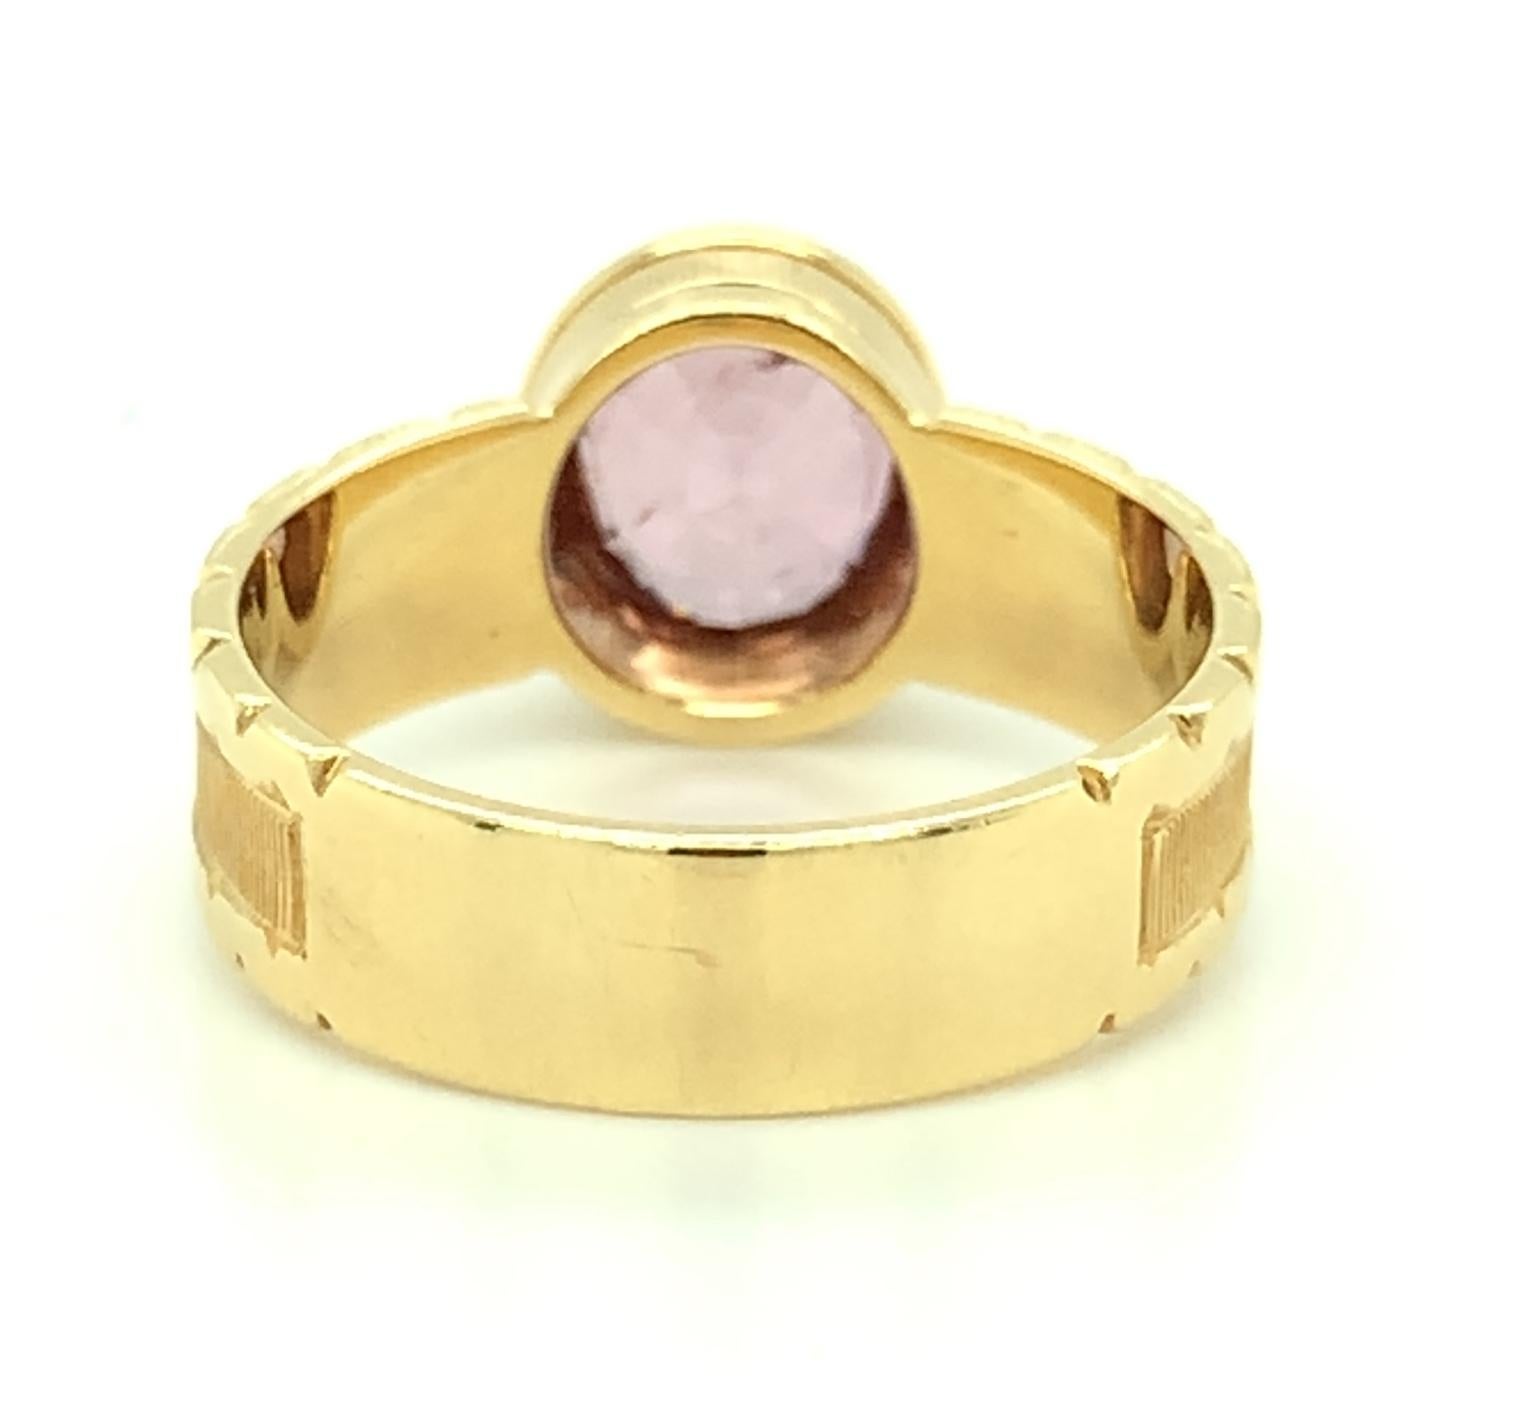 Women's or Men's 2.03 ct. Pink Spinel Band Ring in 18k Yellow Gold   For Sale